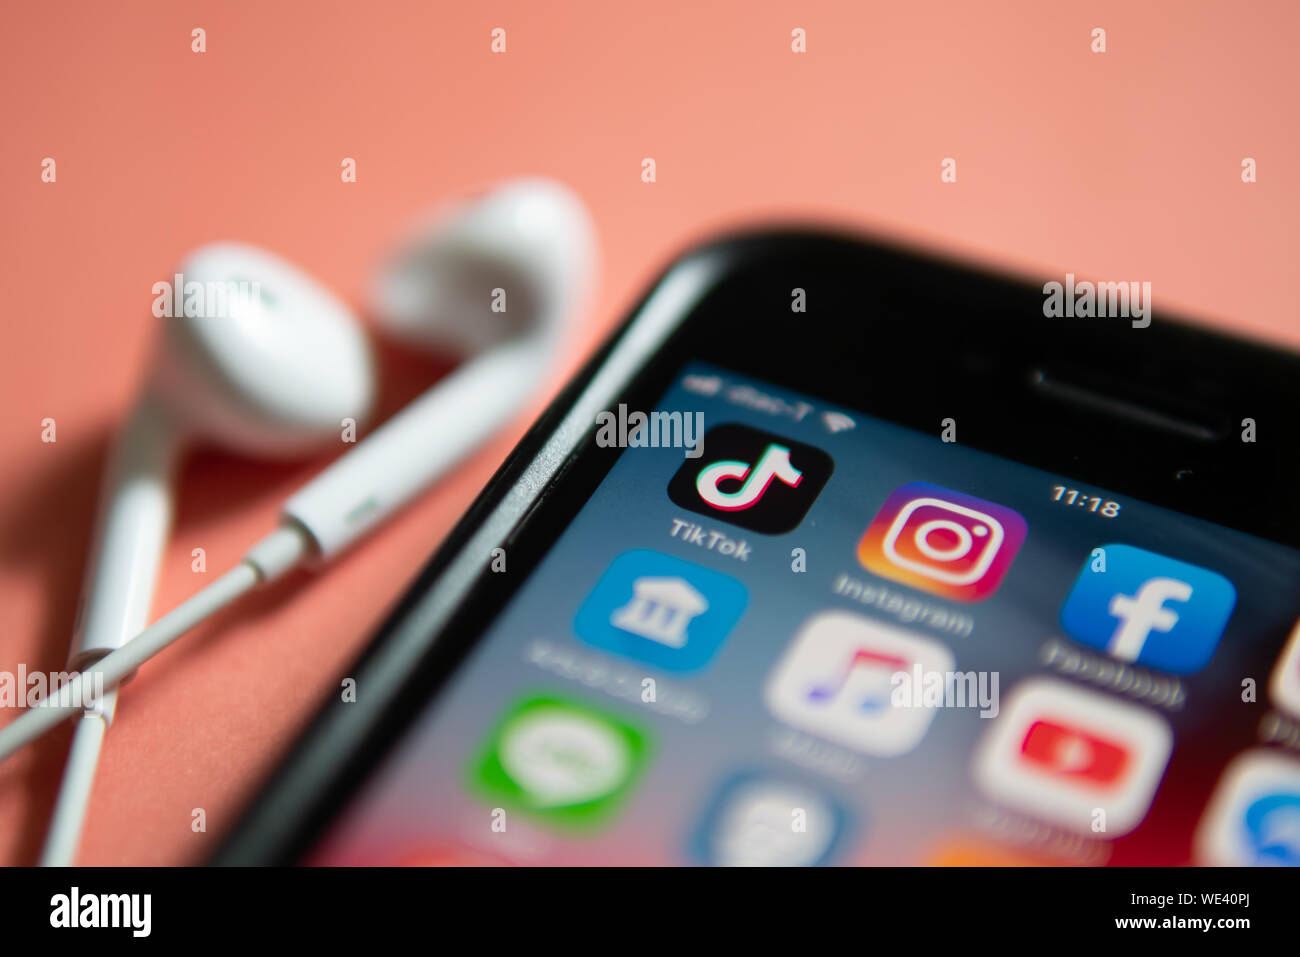 Bangkok, Thailand - August 22, 2019 : iPhone 7 showing its screen with TikTok and other social media application icons. Stock Photo